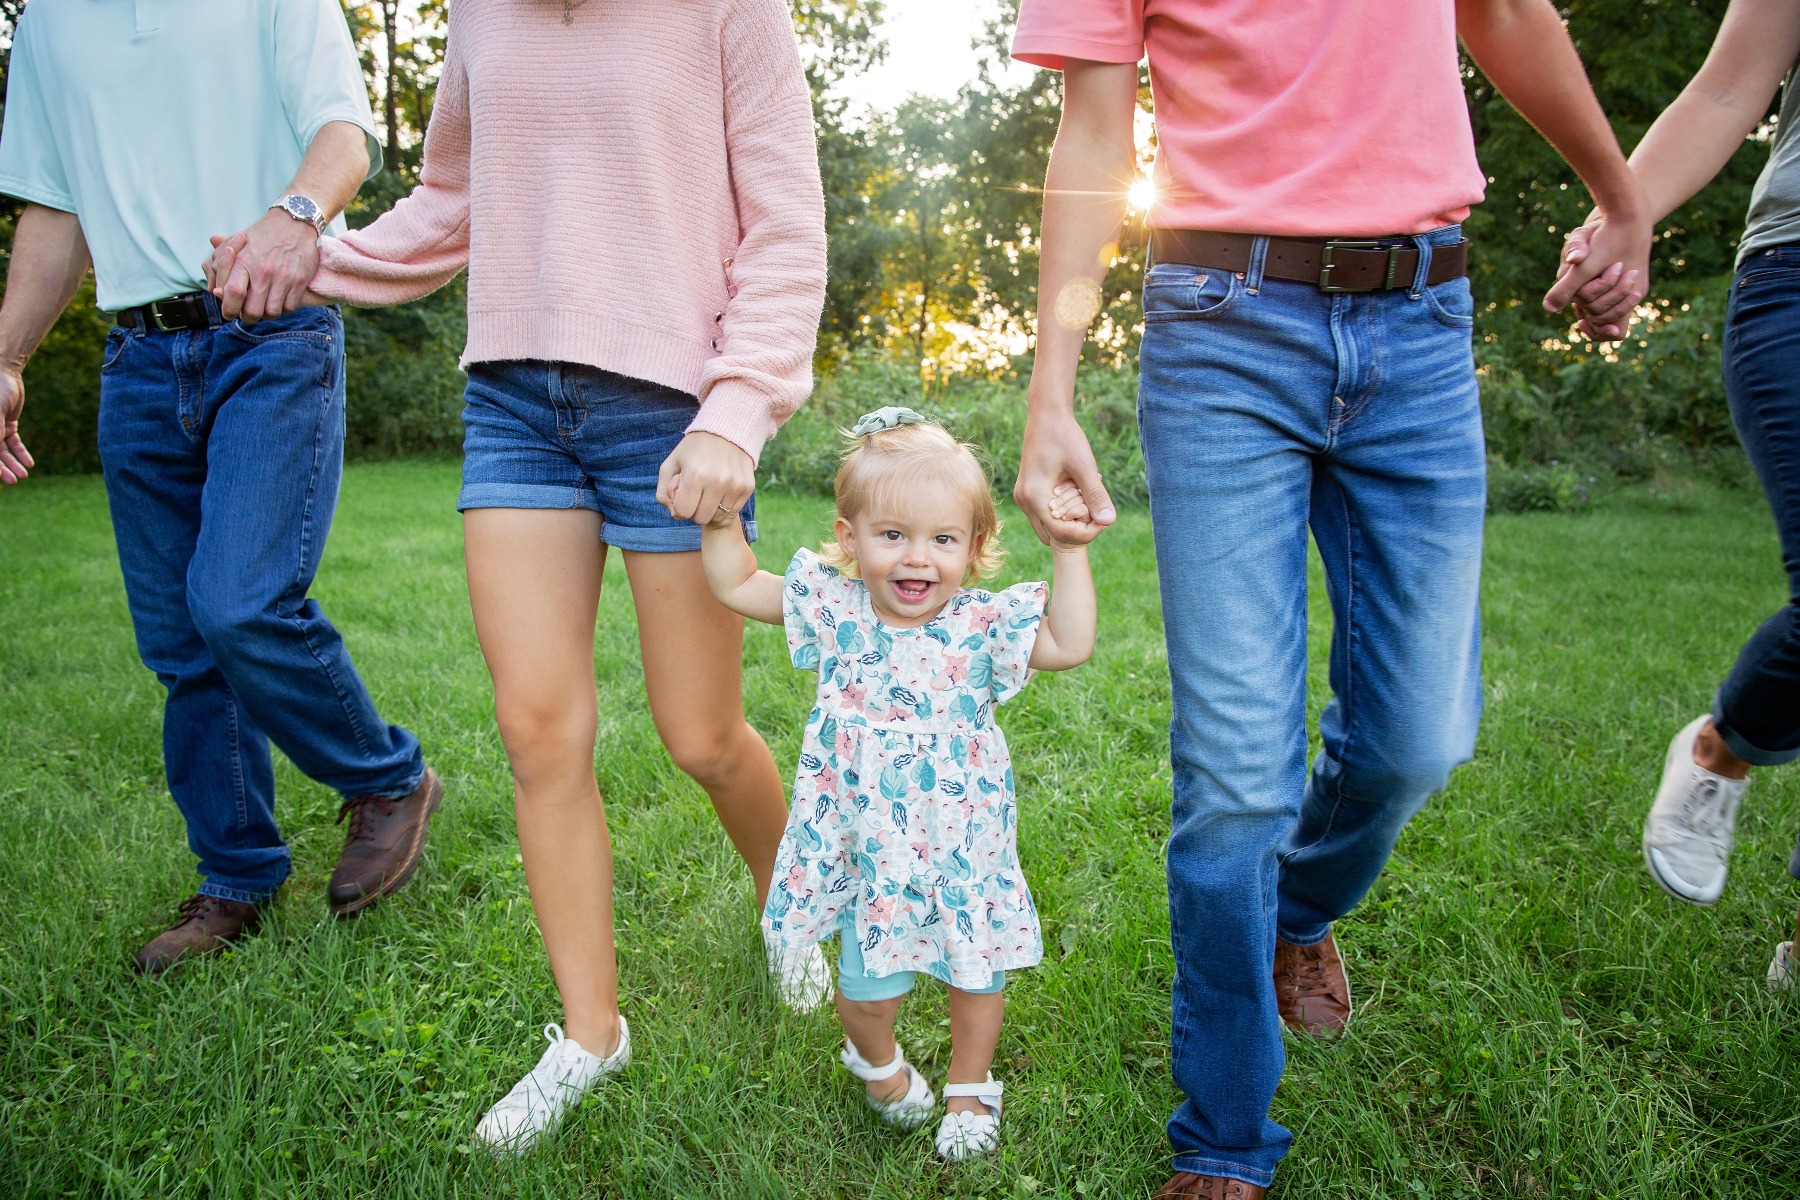 blond haired toddler walks holding hands with her family